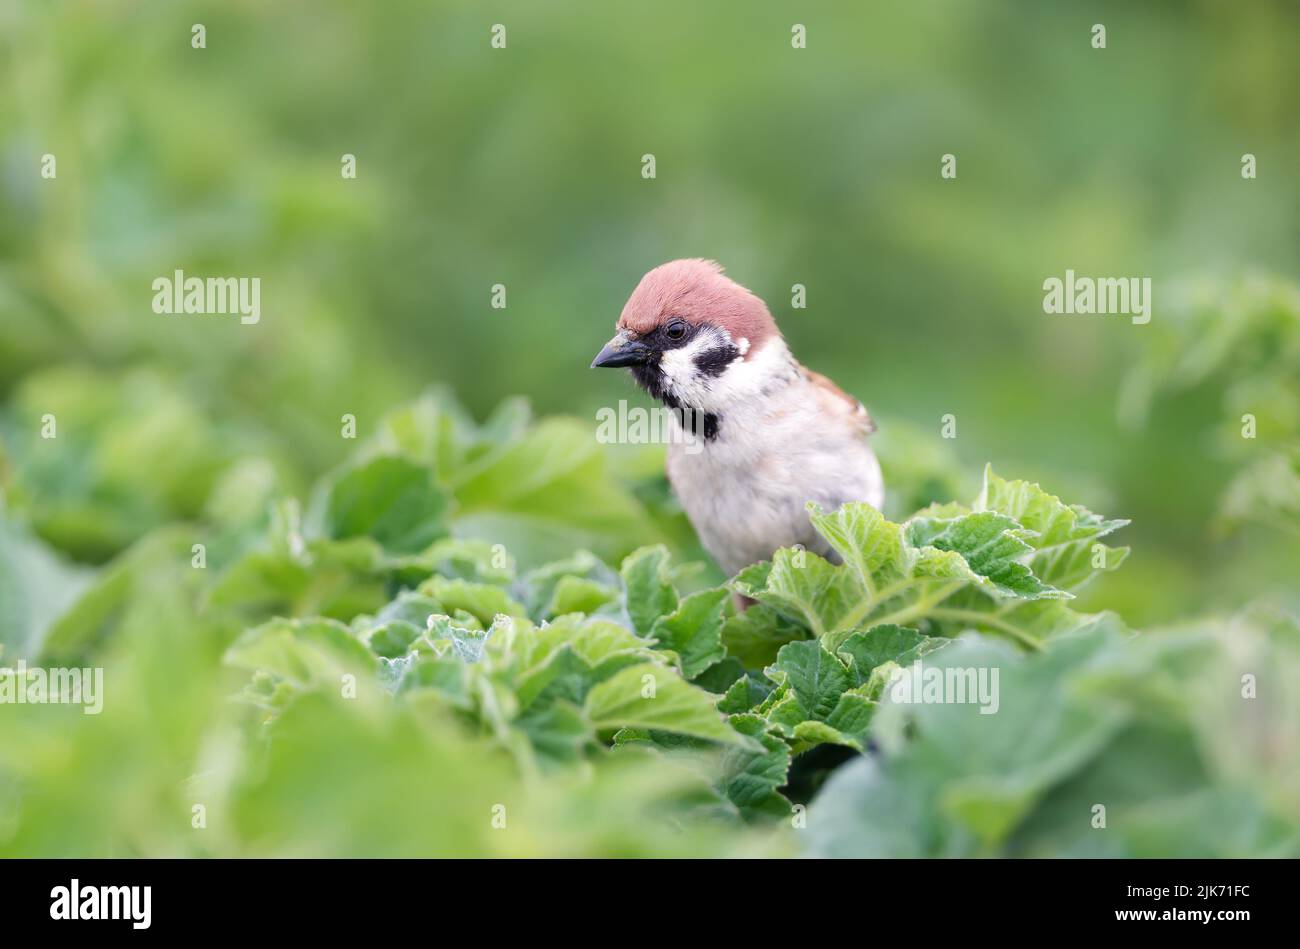 Close up of Eurasian tree sparrow perched on green plants, Bempton cliffs, UK. Stock Photo